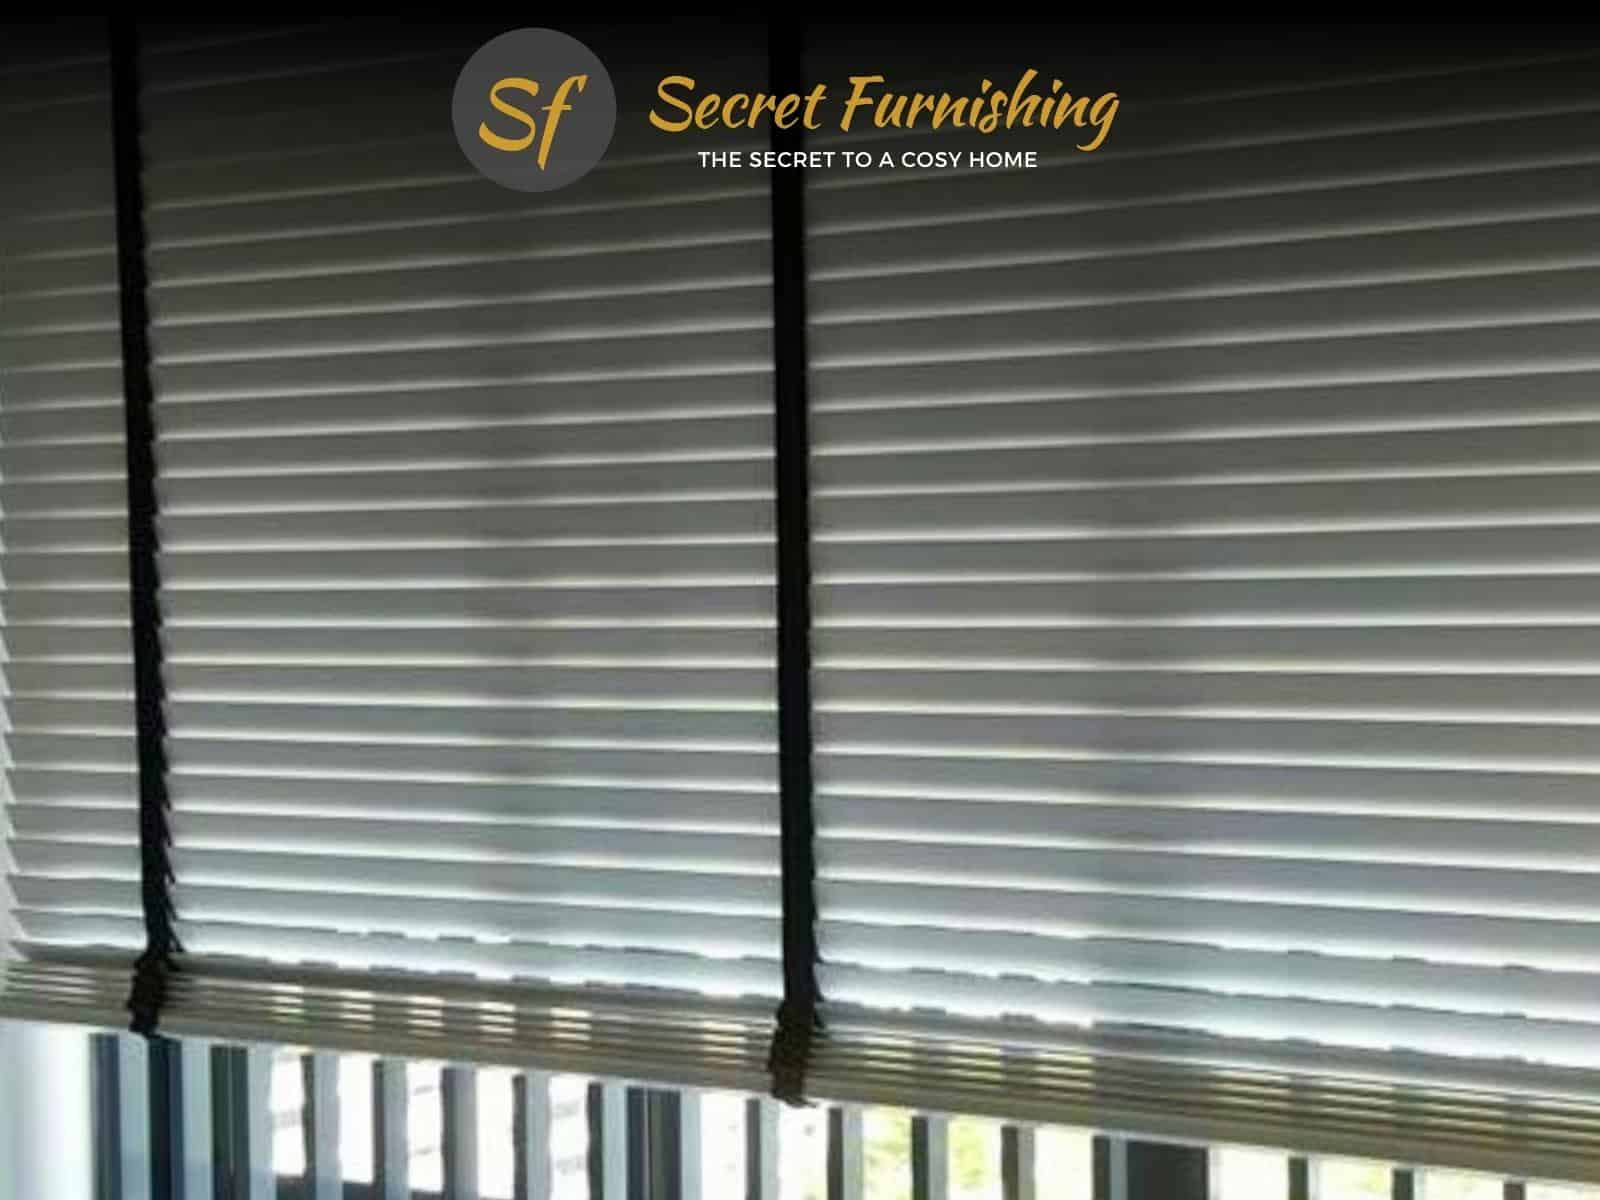 Venetian blinds for high-rise condos in Singapore